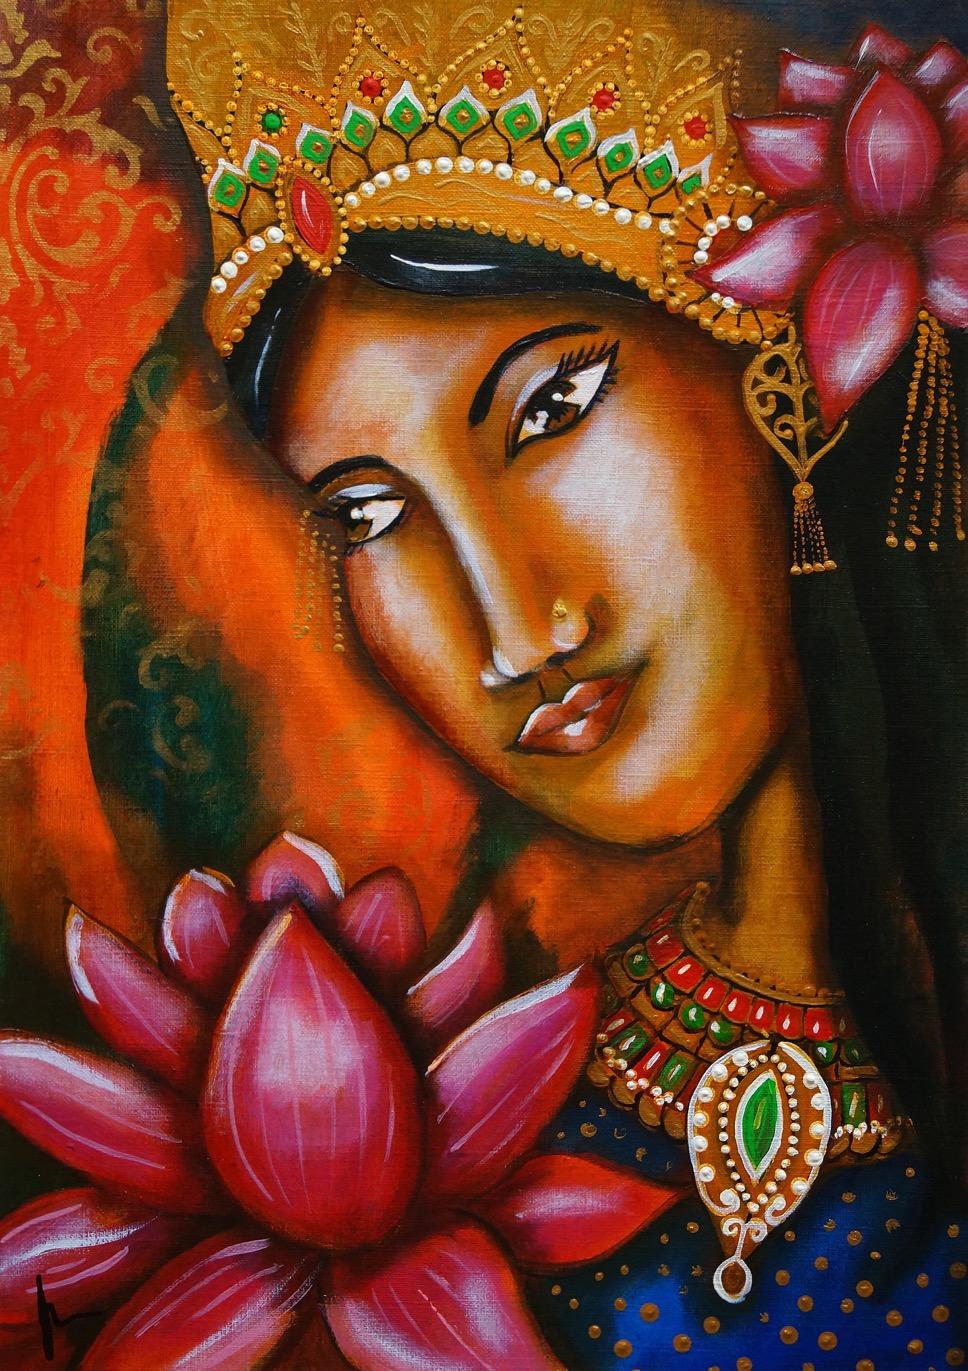 GRACE OF THE GOLDEN GODDESS A Lakshmi Retreat for Wealth, Love, Beauty and